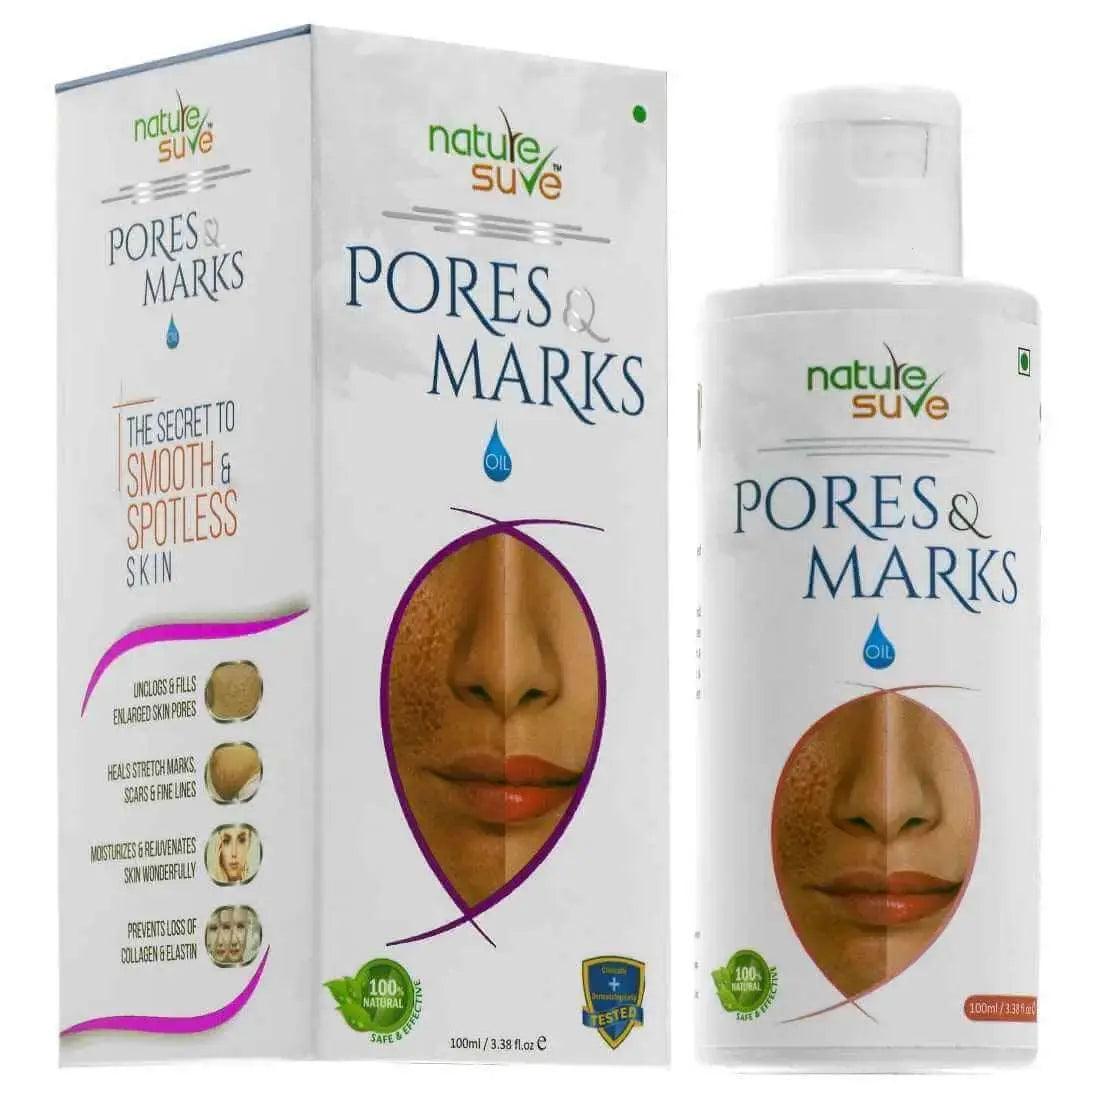 Nature Sure Pores and Marks Oil for Enlarged Skin Pores, Stretch Marks and Fine Lines 8903540009125